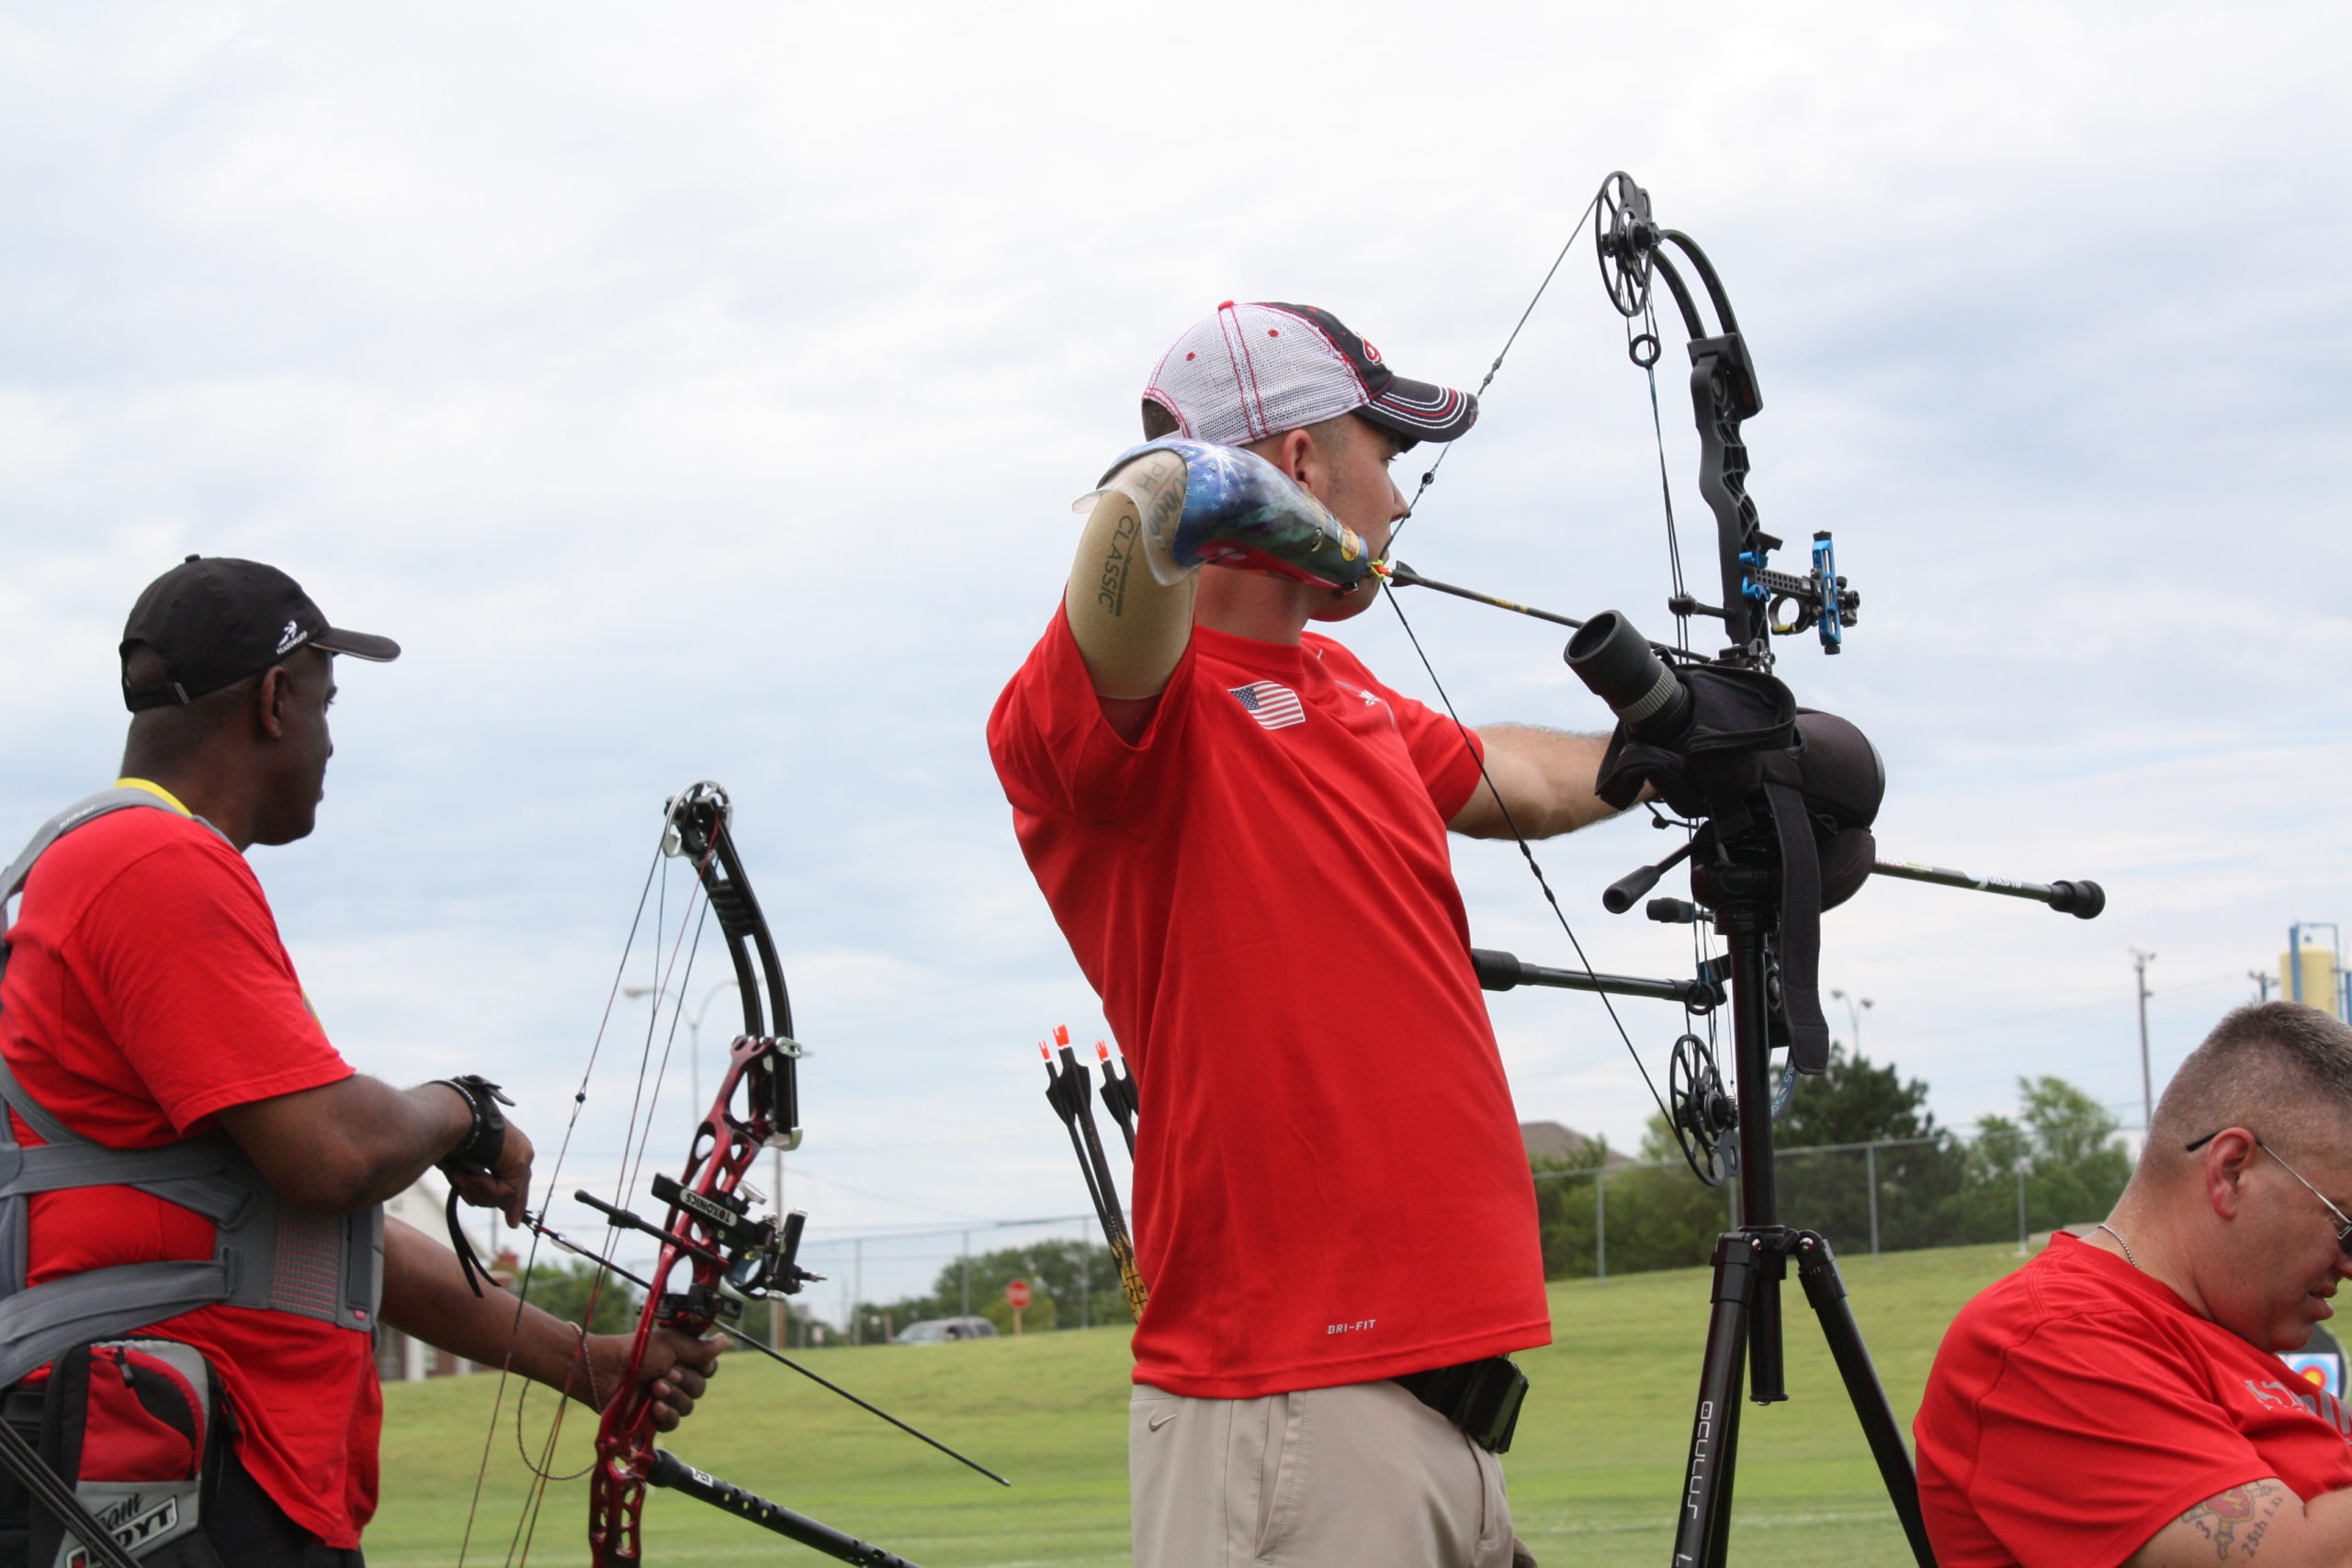 Two athletes participating in adaptive archery.